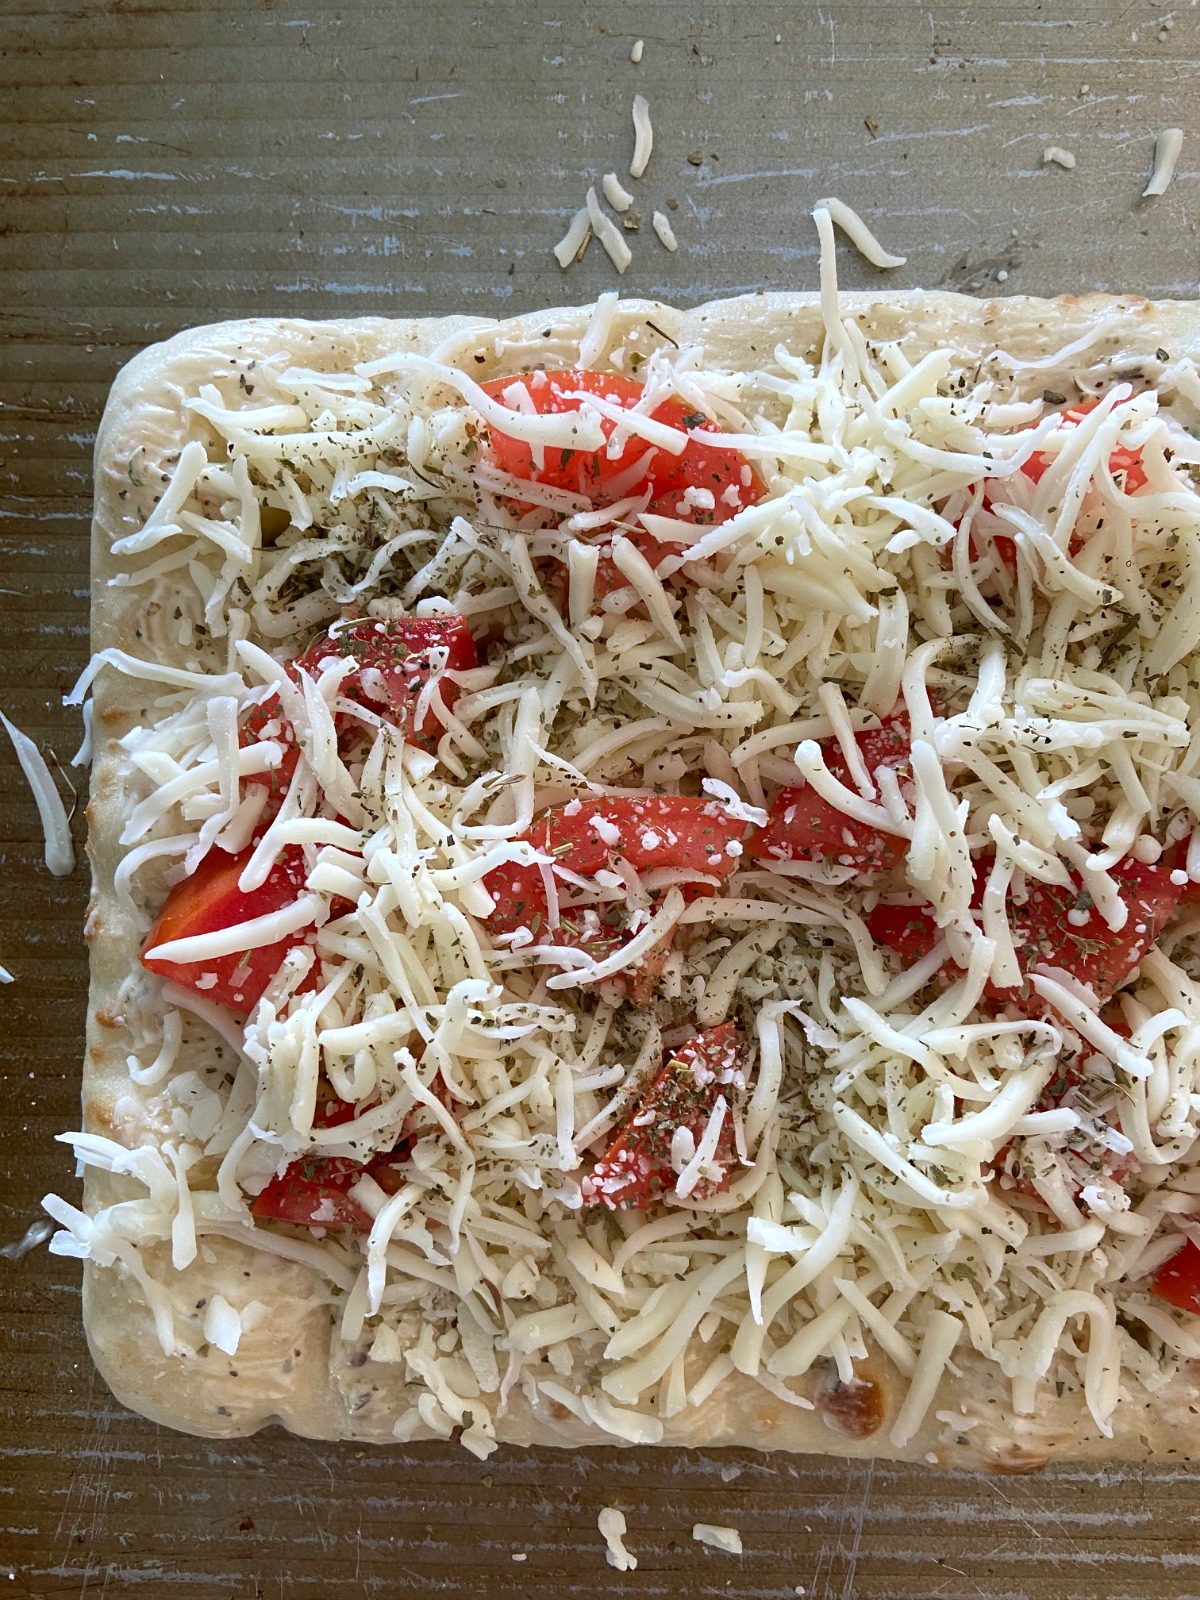 Flatbread topped with shredded cheese, sliced tomatoes and spices on a baking sheet